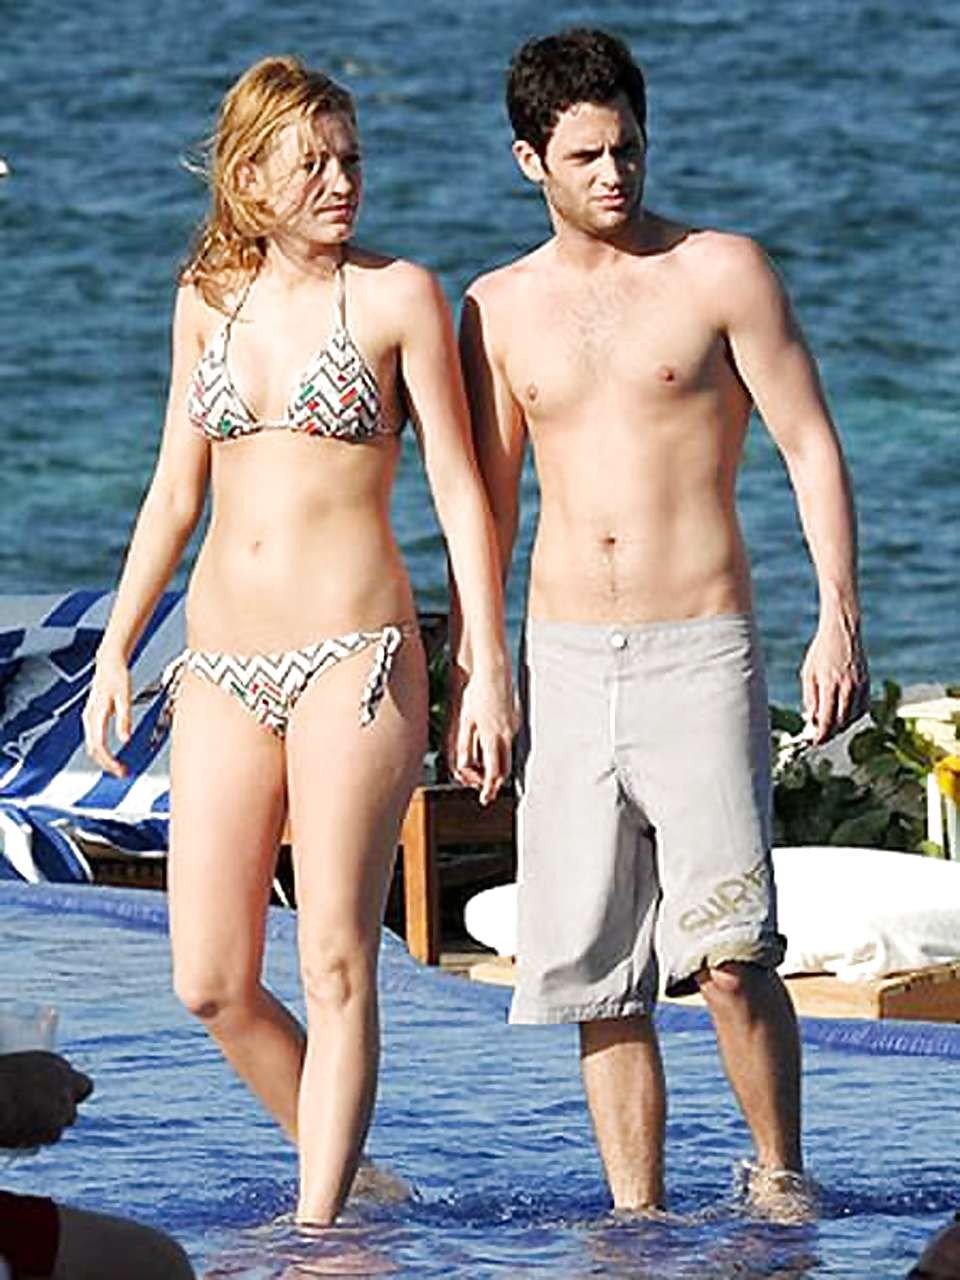 Blake Lively nipple slip and sexy in bikini on beach paparazzi pictures and show #75301185